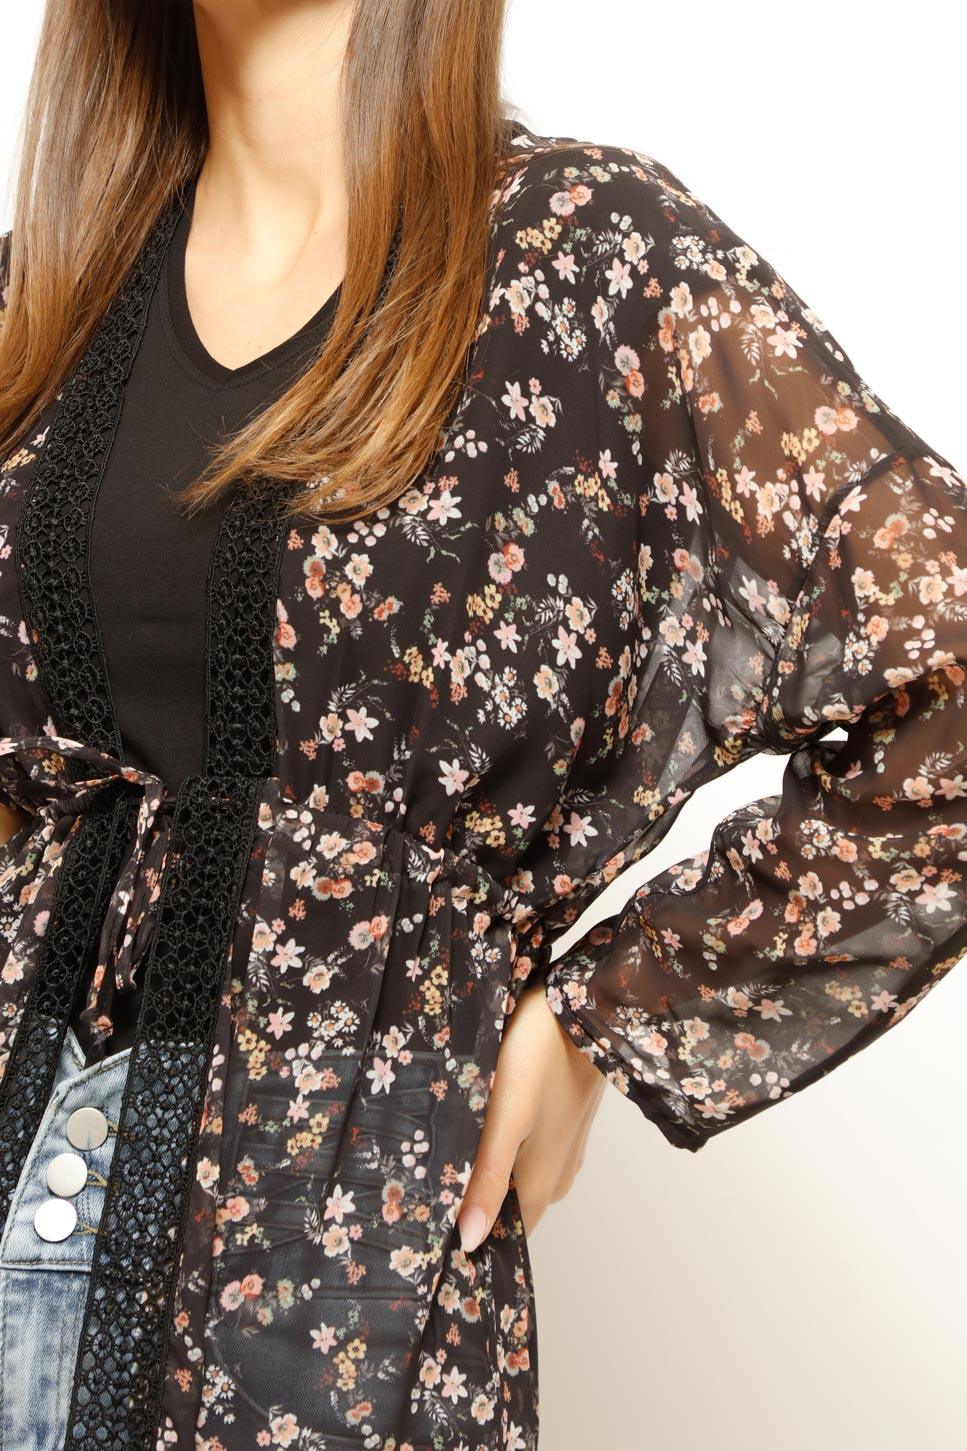 HIRKA FLOWY FLORAL CARDIGAN, CARDIGAN, CORADO, be unique, black, cardigan, corado fashion, coradomoda, FASHION, floral, flowy, lace, lifestyle, made in turkey, new collection, see through, statement, style, tie, top, women, women's fashion, coradomoda, coradomoda.com